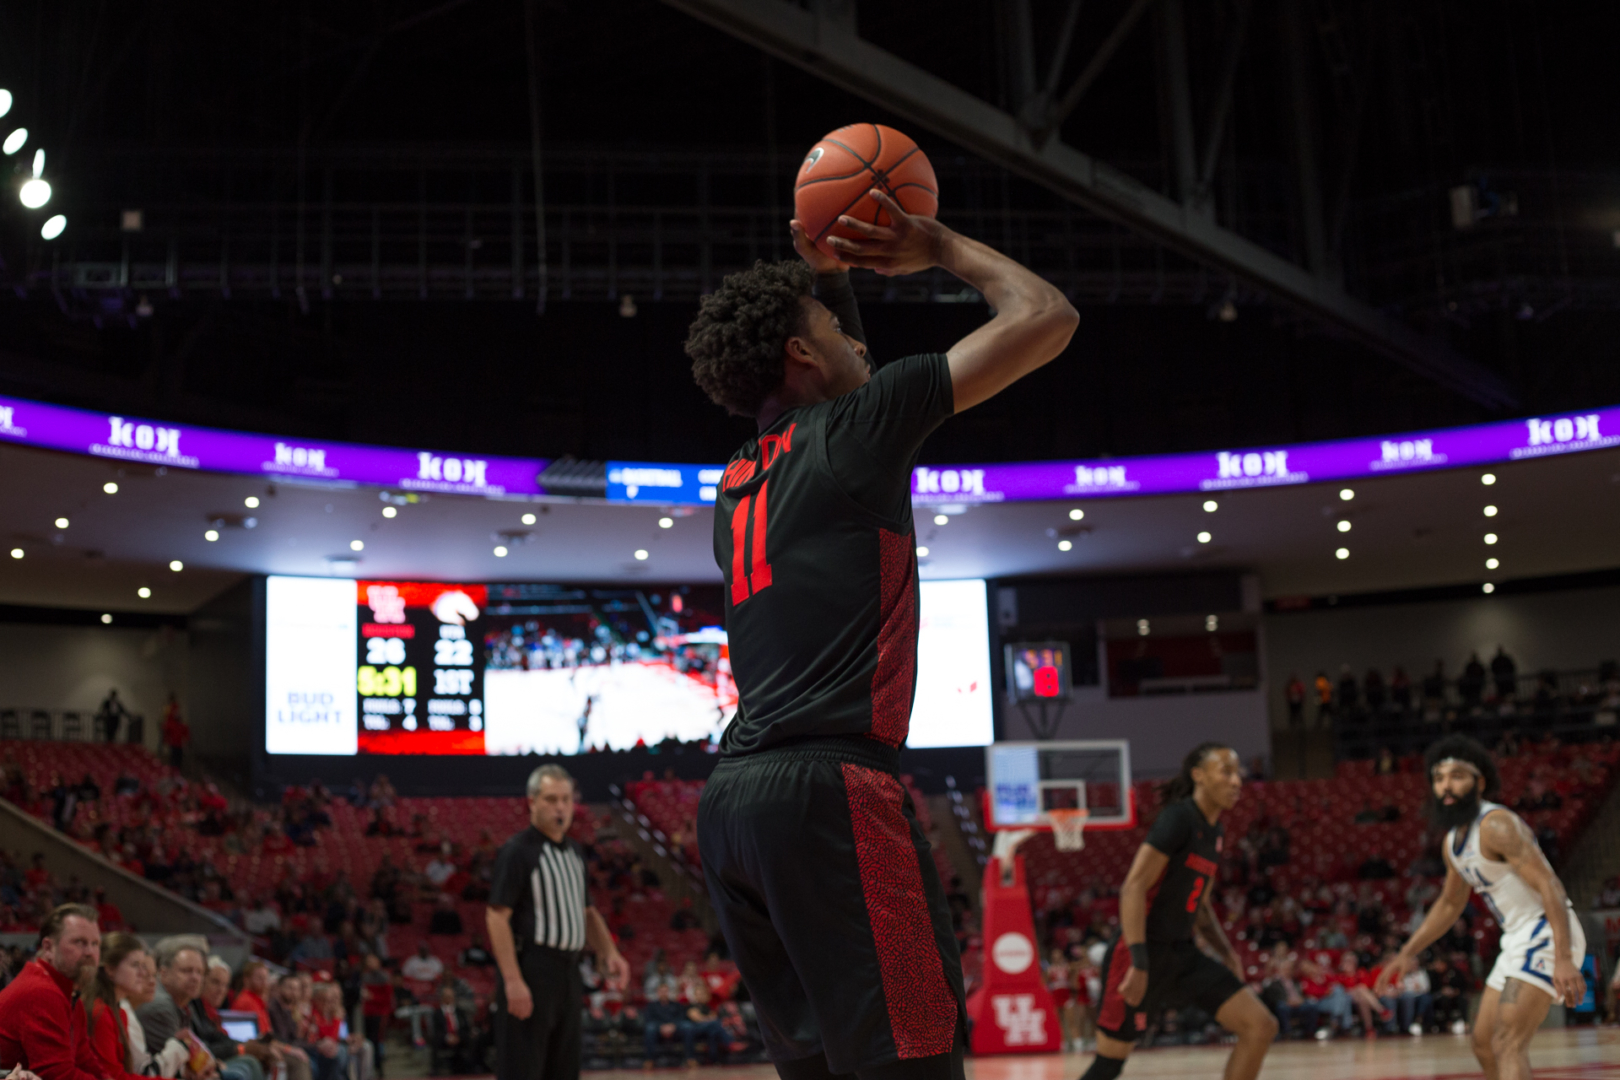 Nate Hinton, who is averaging 12.5 points and 9.9 rebounds on the season entering the game against Tulsa, shooting a 3-pointer. | File Photo